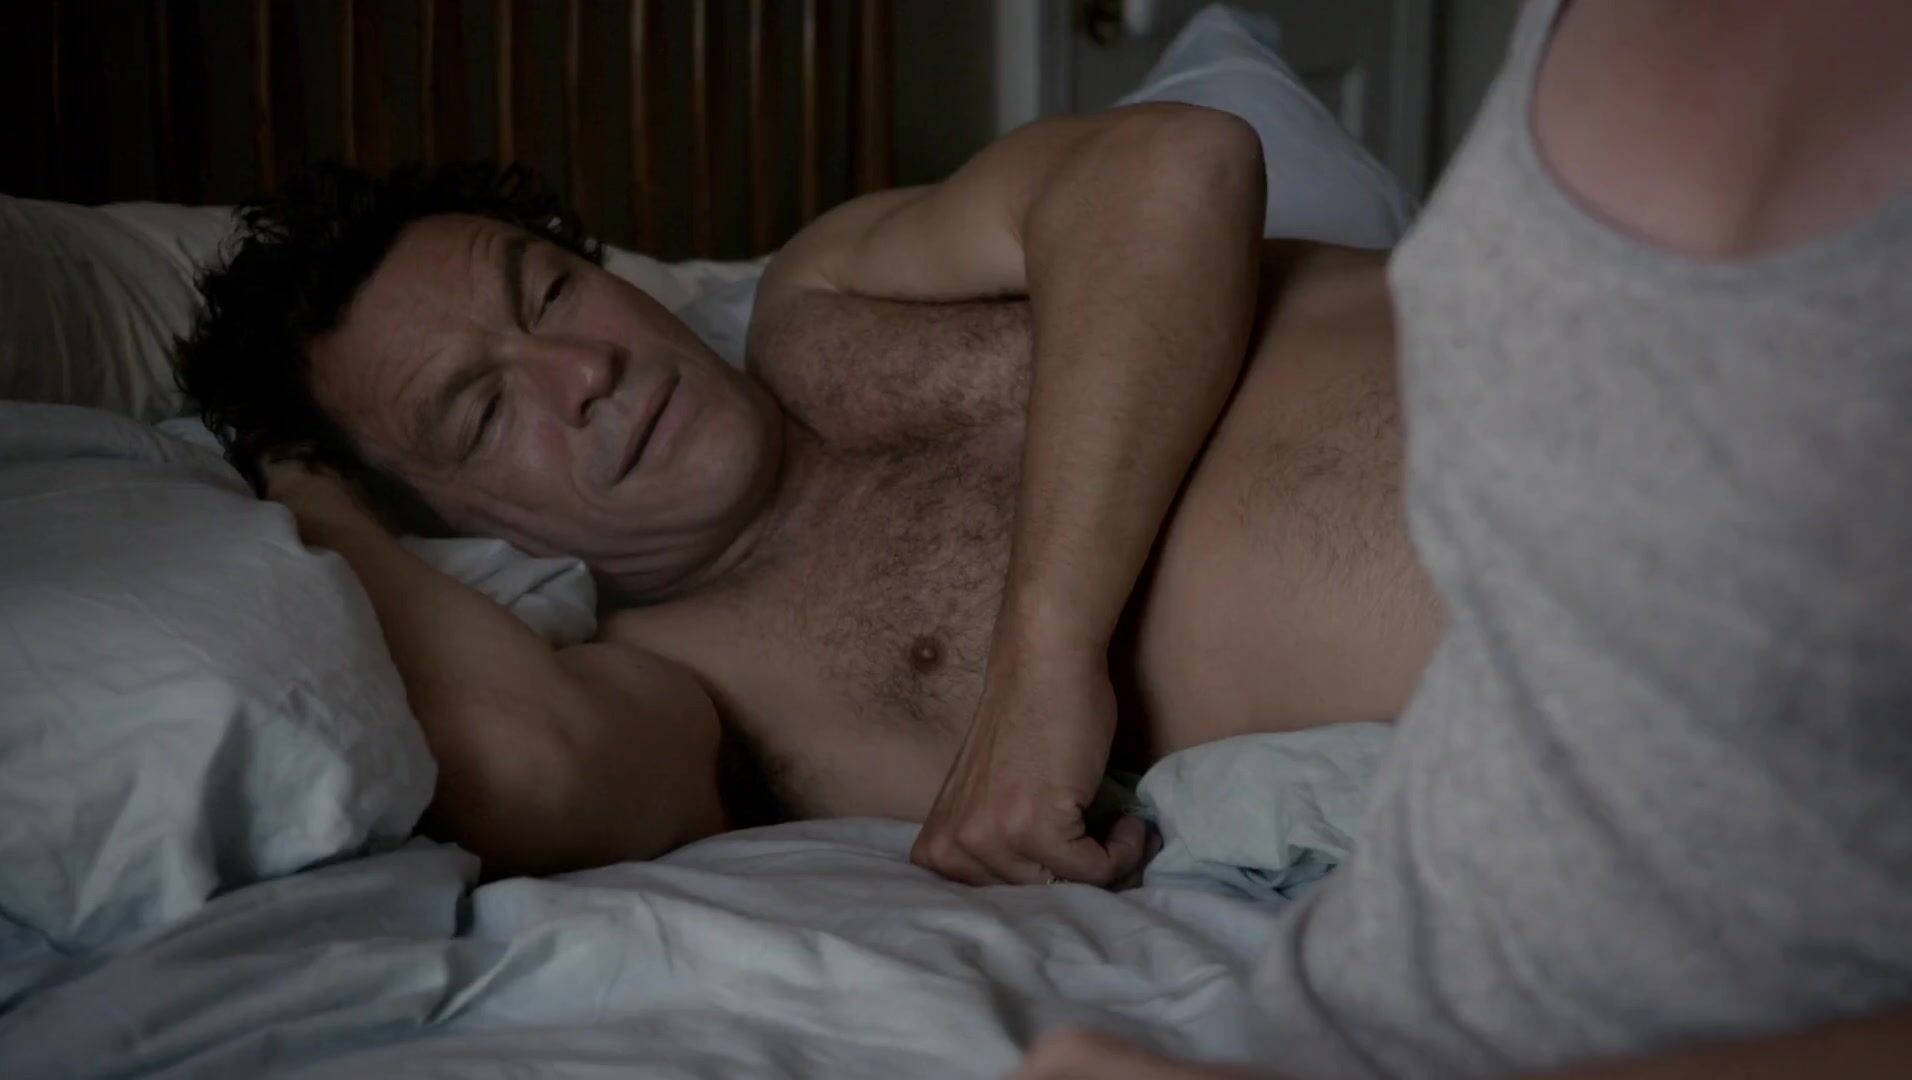 Livesex Maura Tierney allows man to try her peach and fuck it in series Affair S01e01 (2014) Sensual - 1